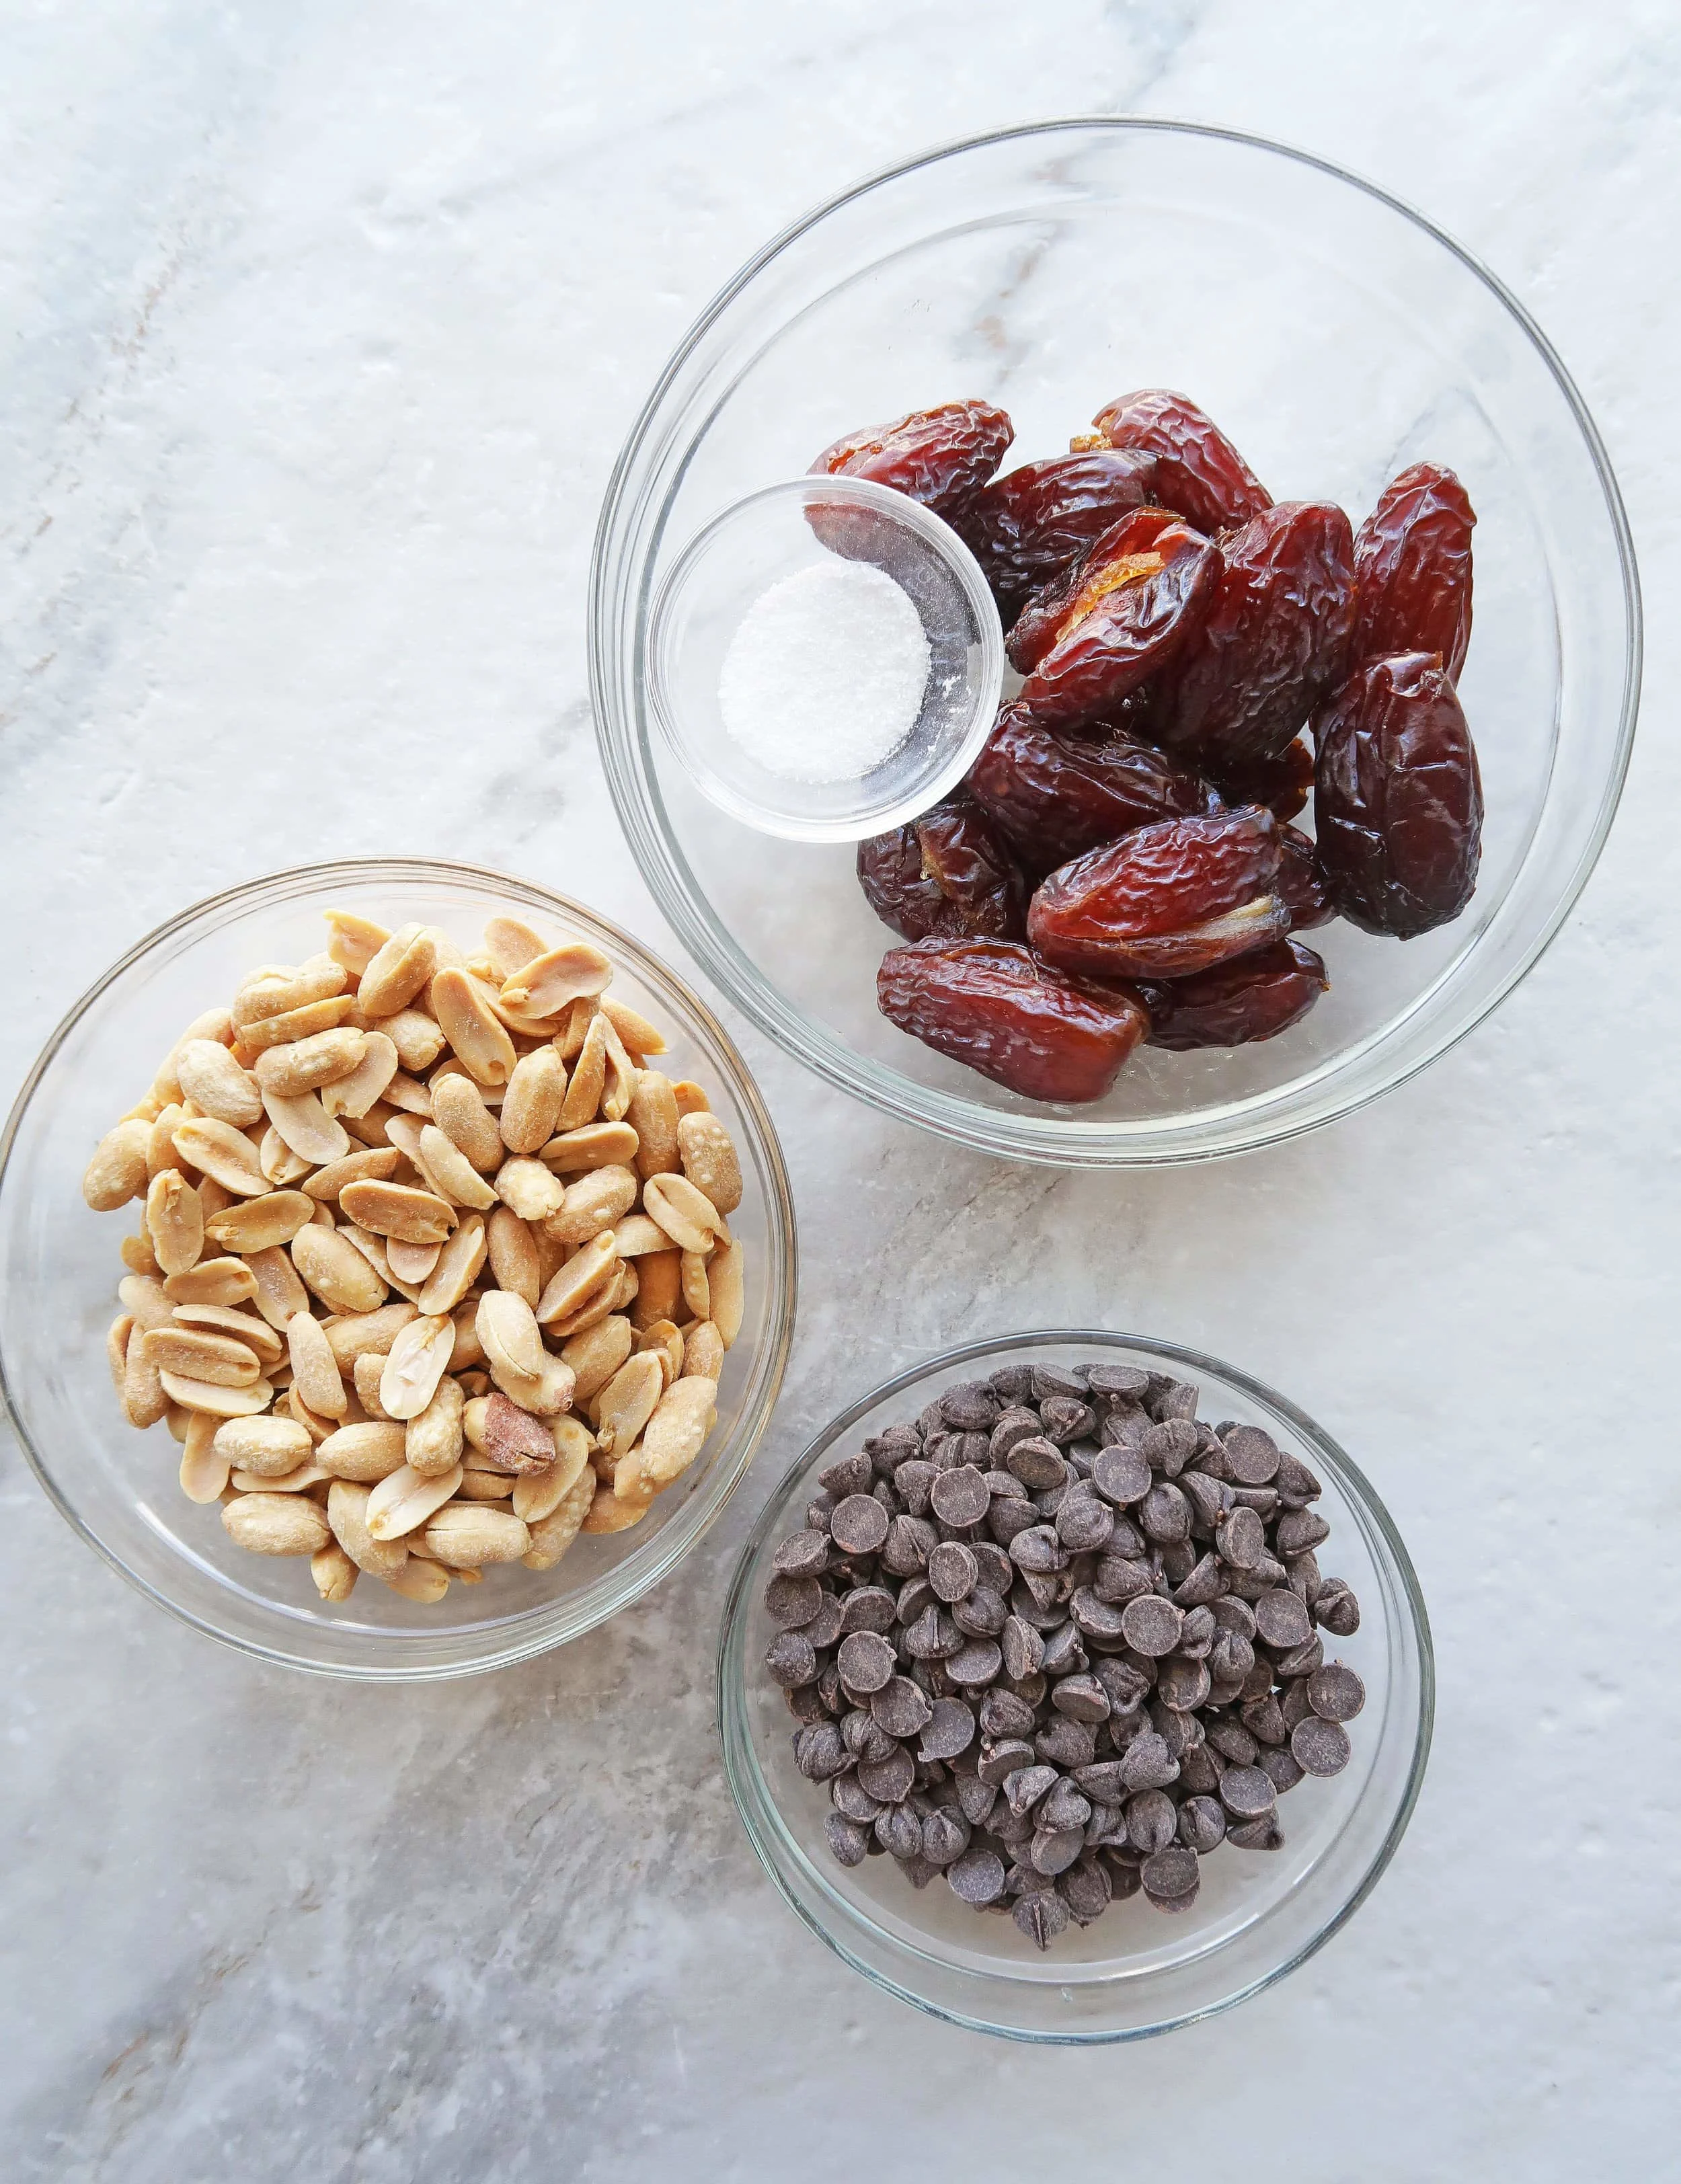 Bowls of roasted salted peanuts, chocolate chips, Medjool dates, and salt.